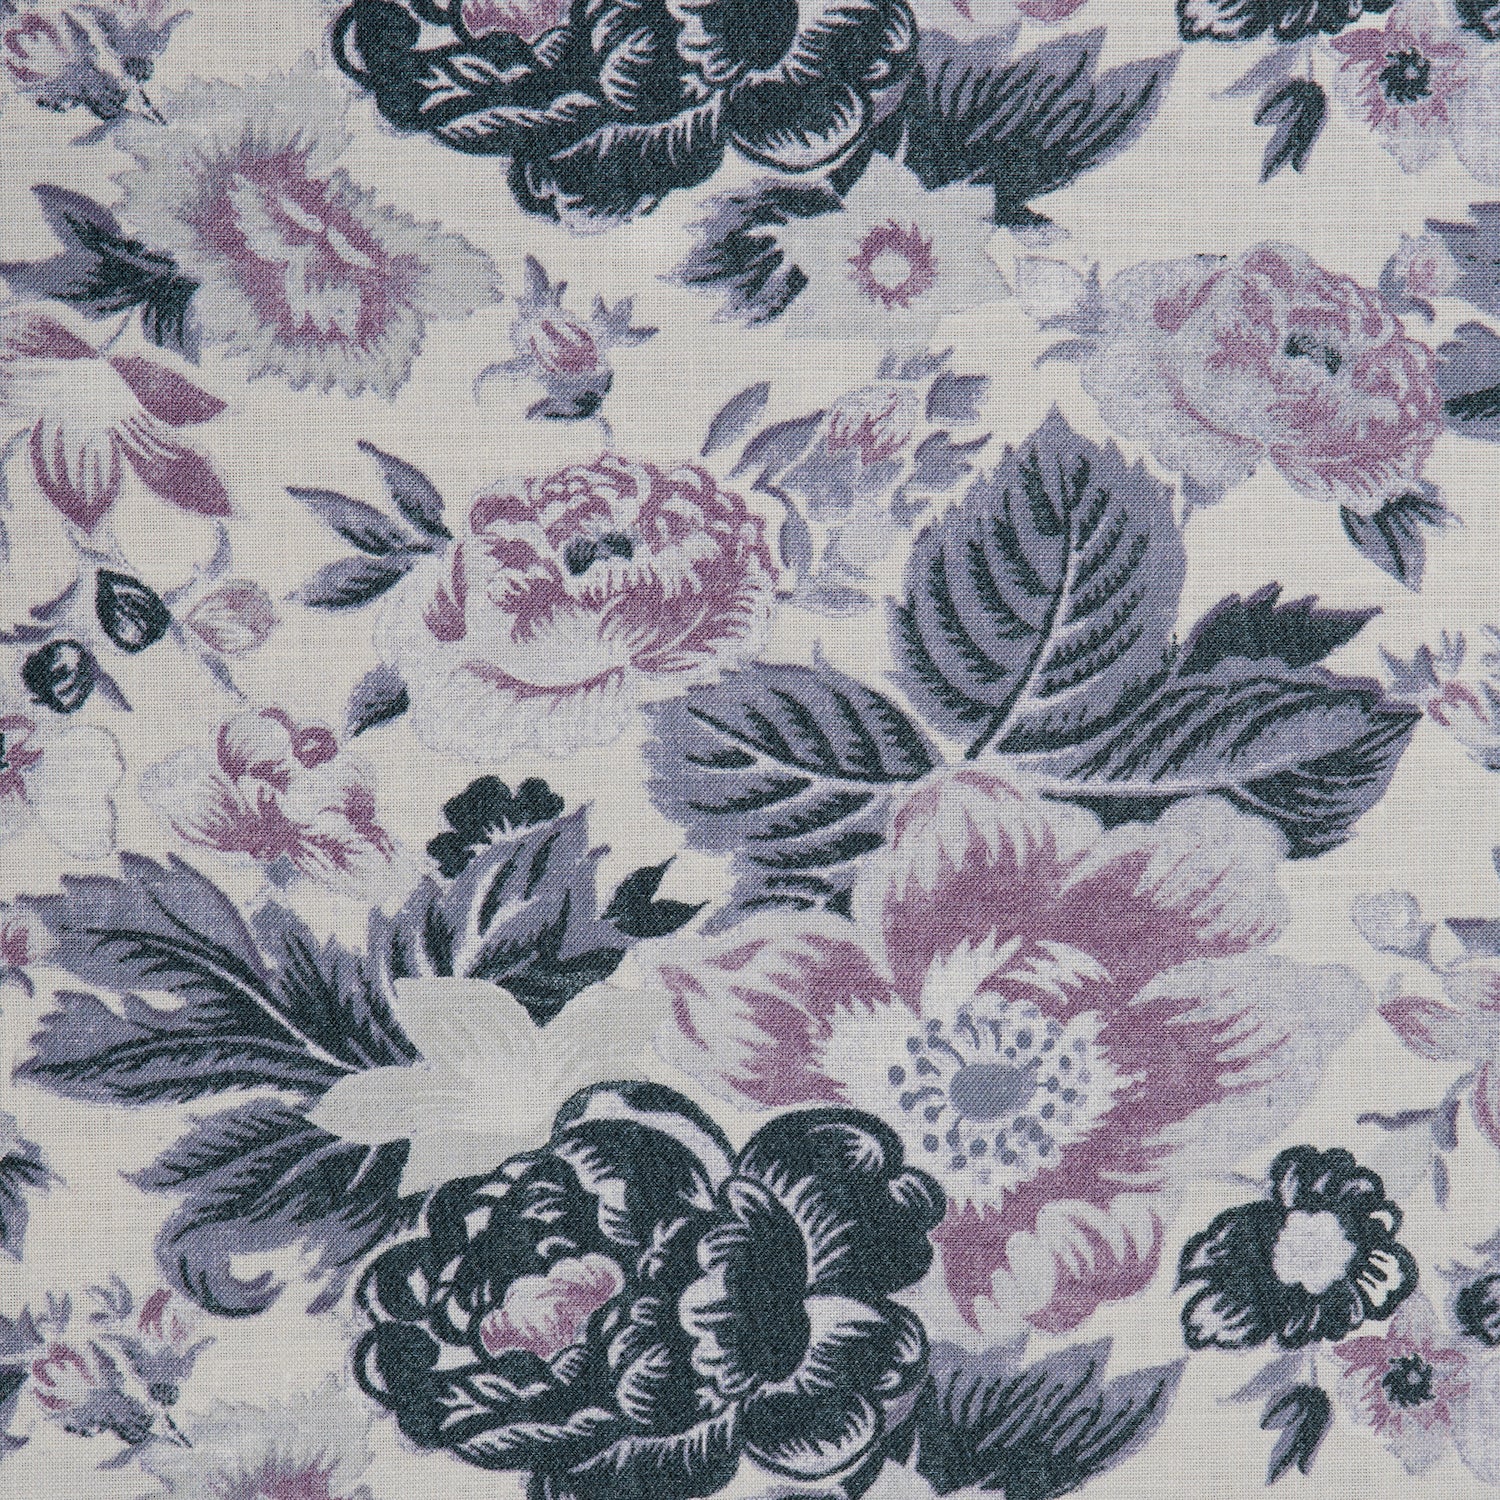 Detail of a linen fabric in a detailed floral pattern in shades of purple and gray on a light gray field.